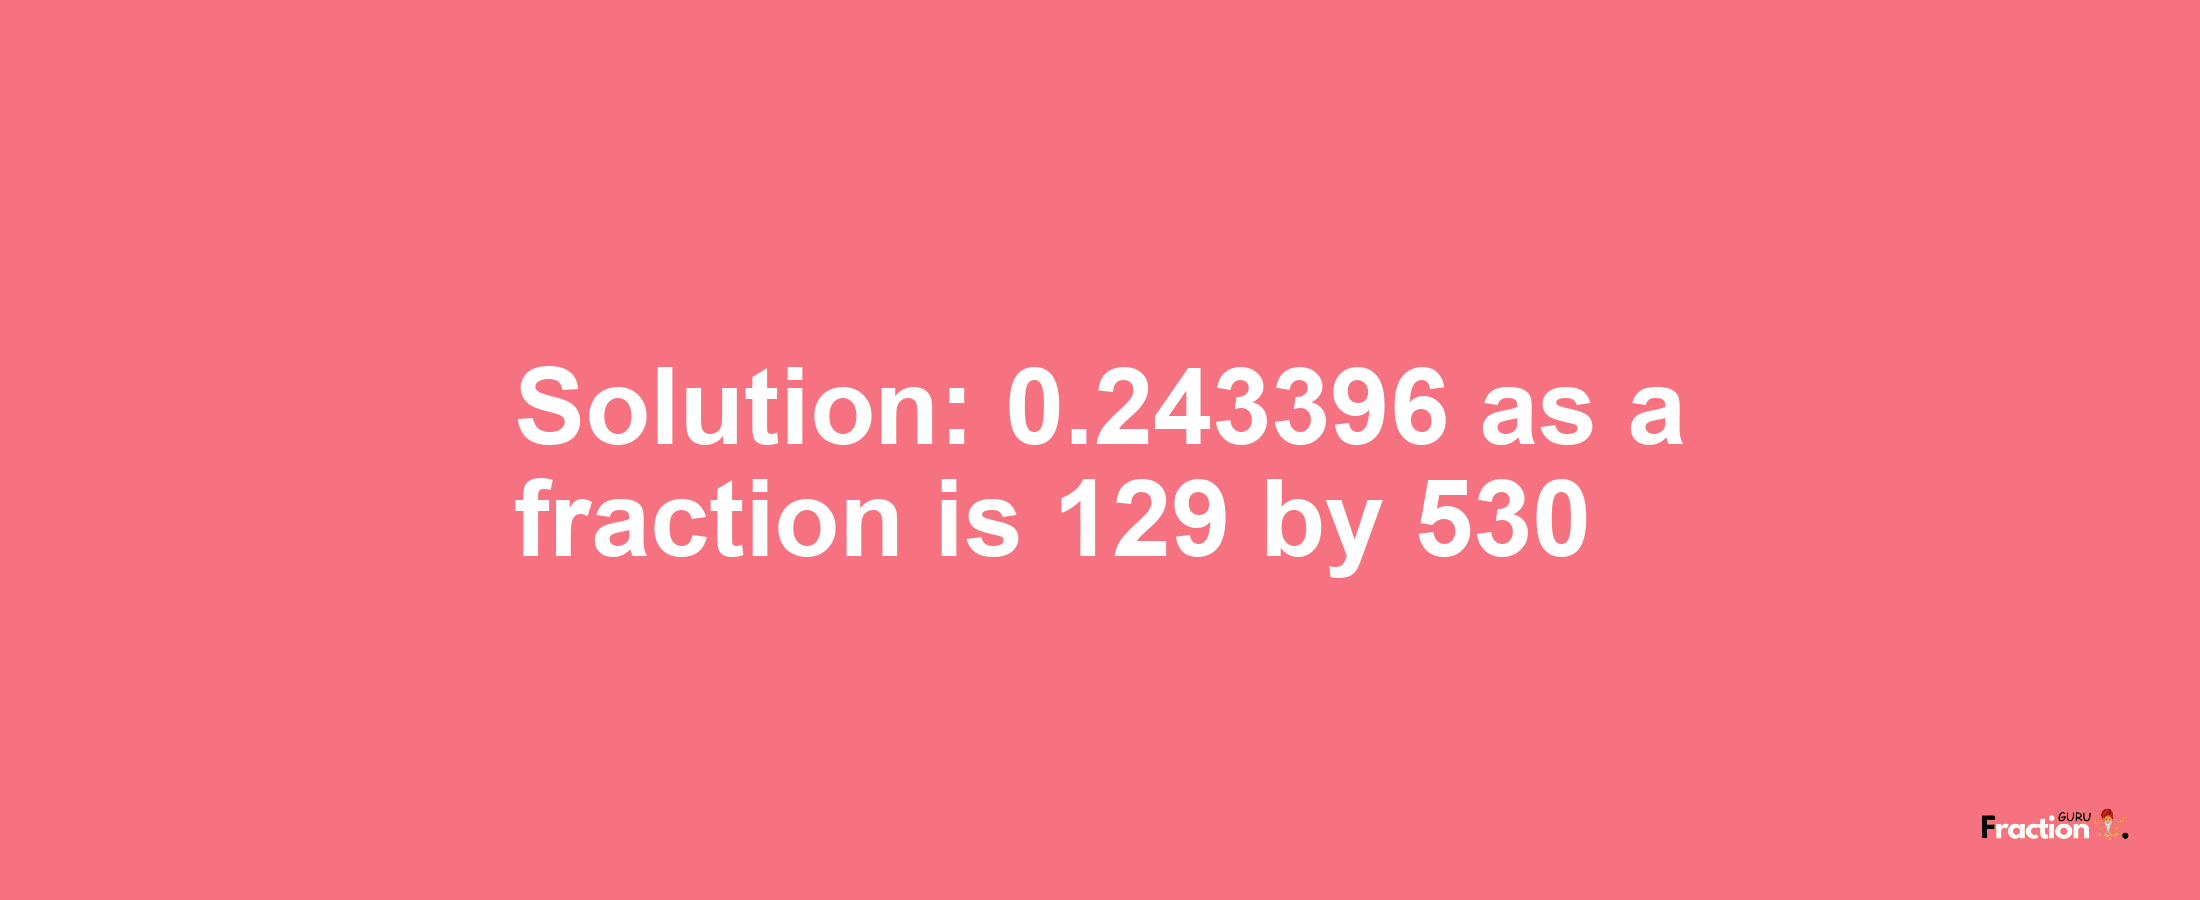 Solution:0.243396 as a fraction is 129/530